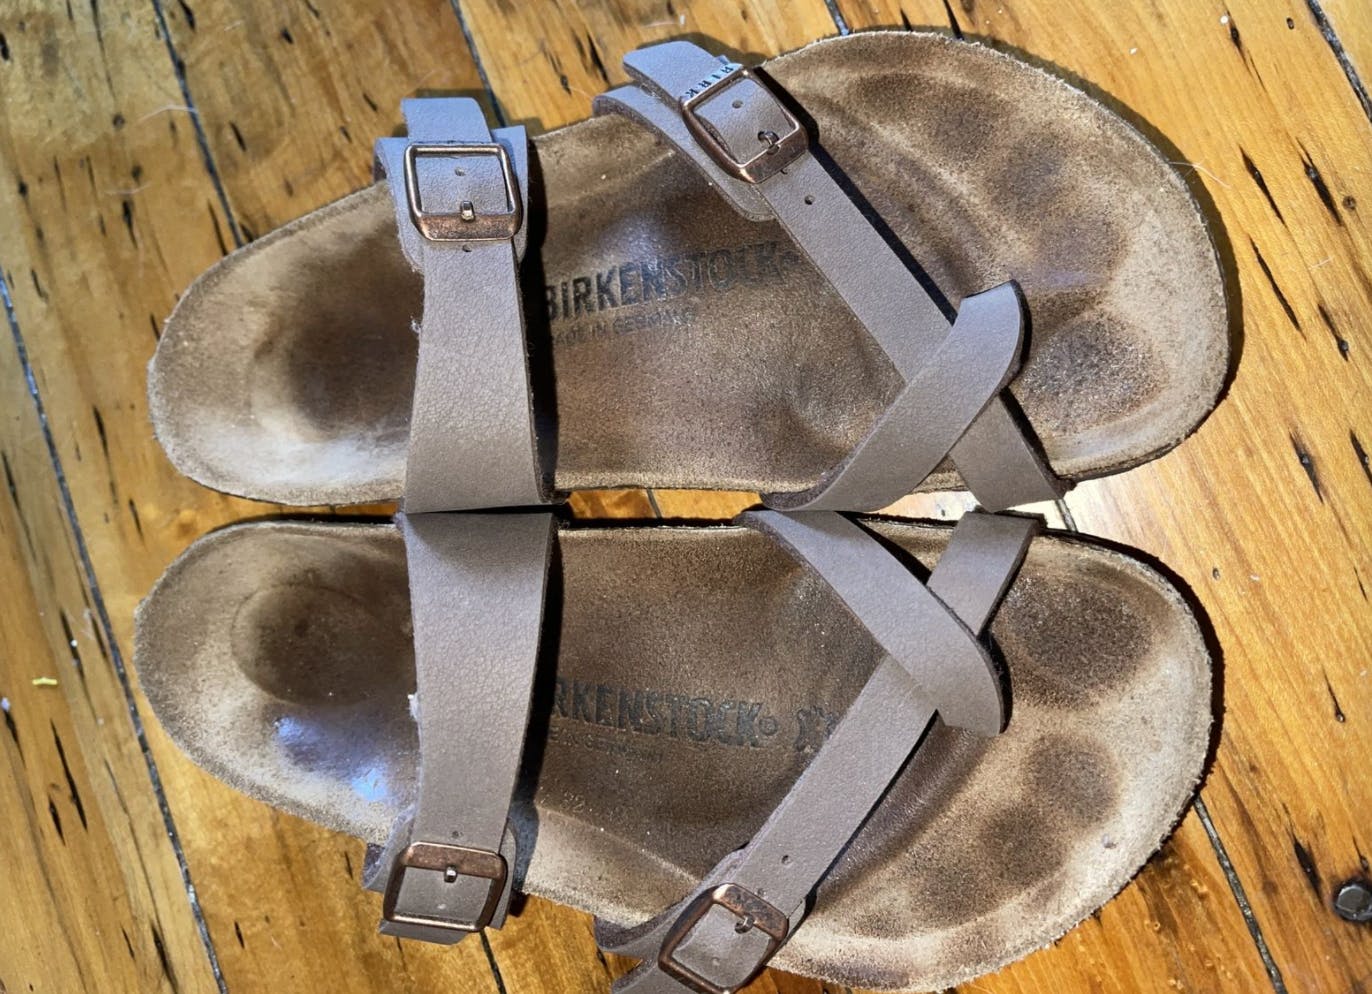 18 Ways to Get Cheap Birkenstocks Sale - The Krazy Coupon